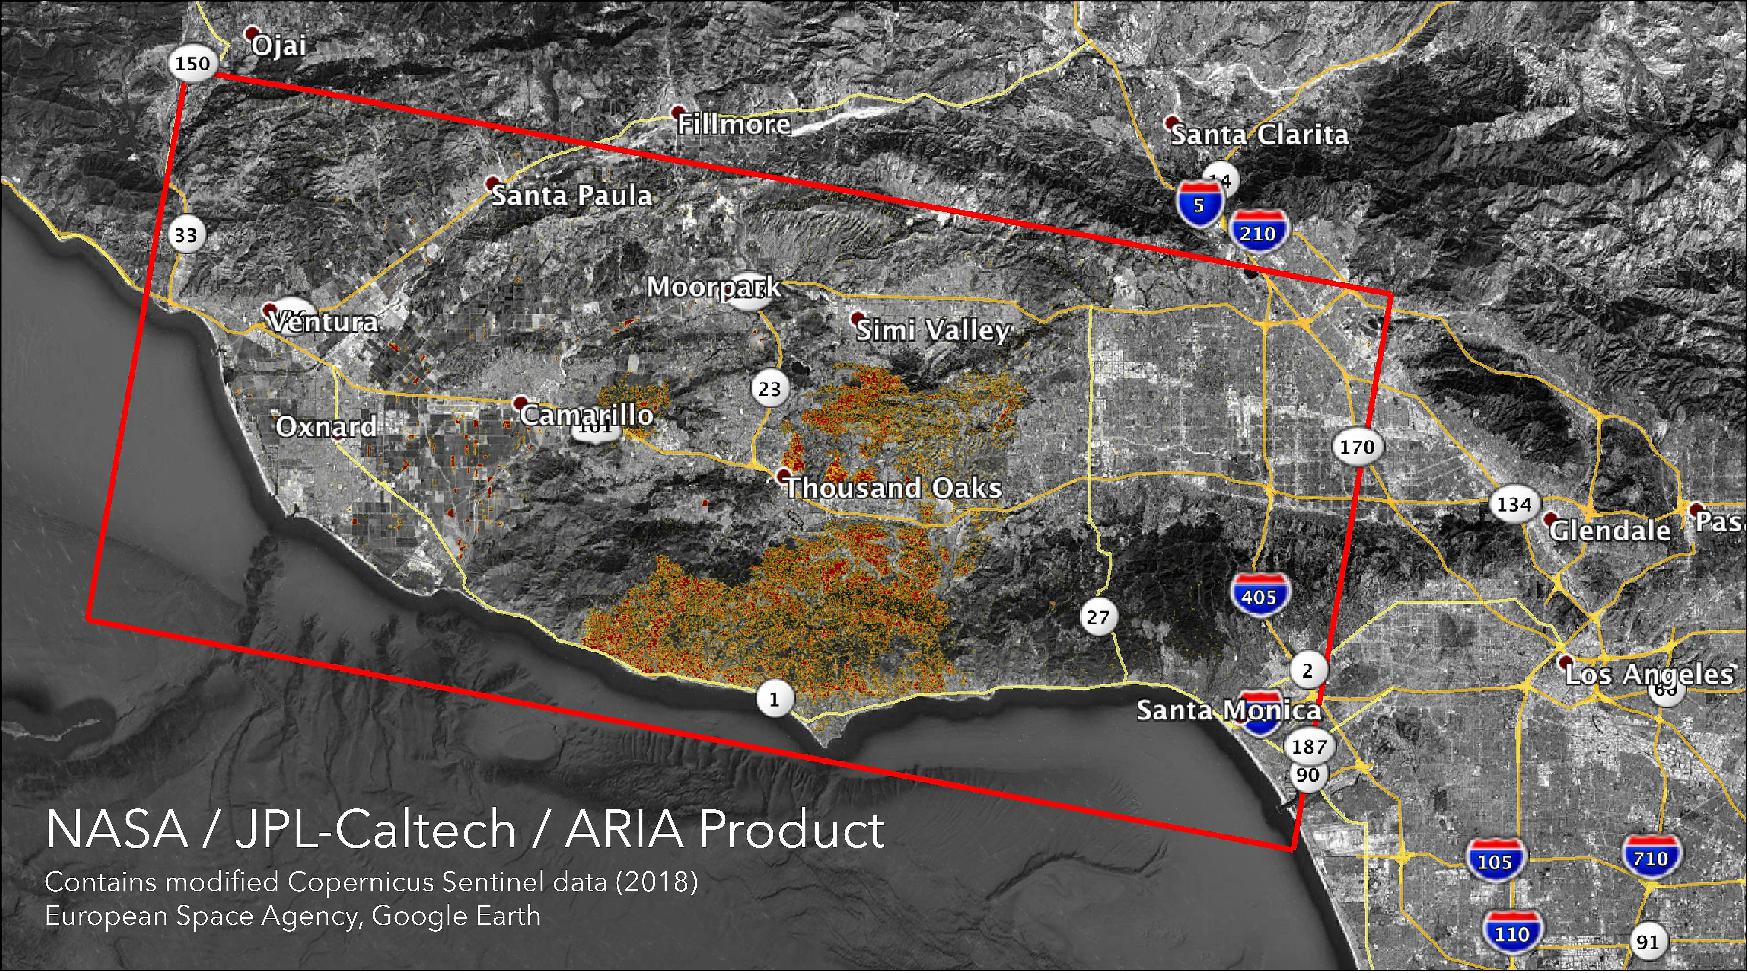 Figure 5: The ARIA (Advanced Rapid Imaging and Analysis) team at NASA/JPL in Pasadena, California, created these DPMs (Damage Proxy Maps) depicting areas in California likely damaged by the Woolsey and Camp Fires (image credit: NASA/JPL)